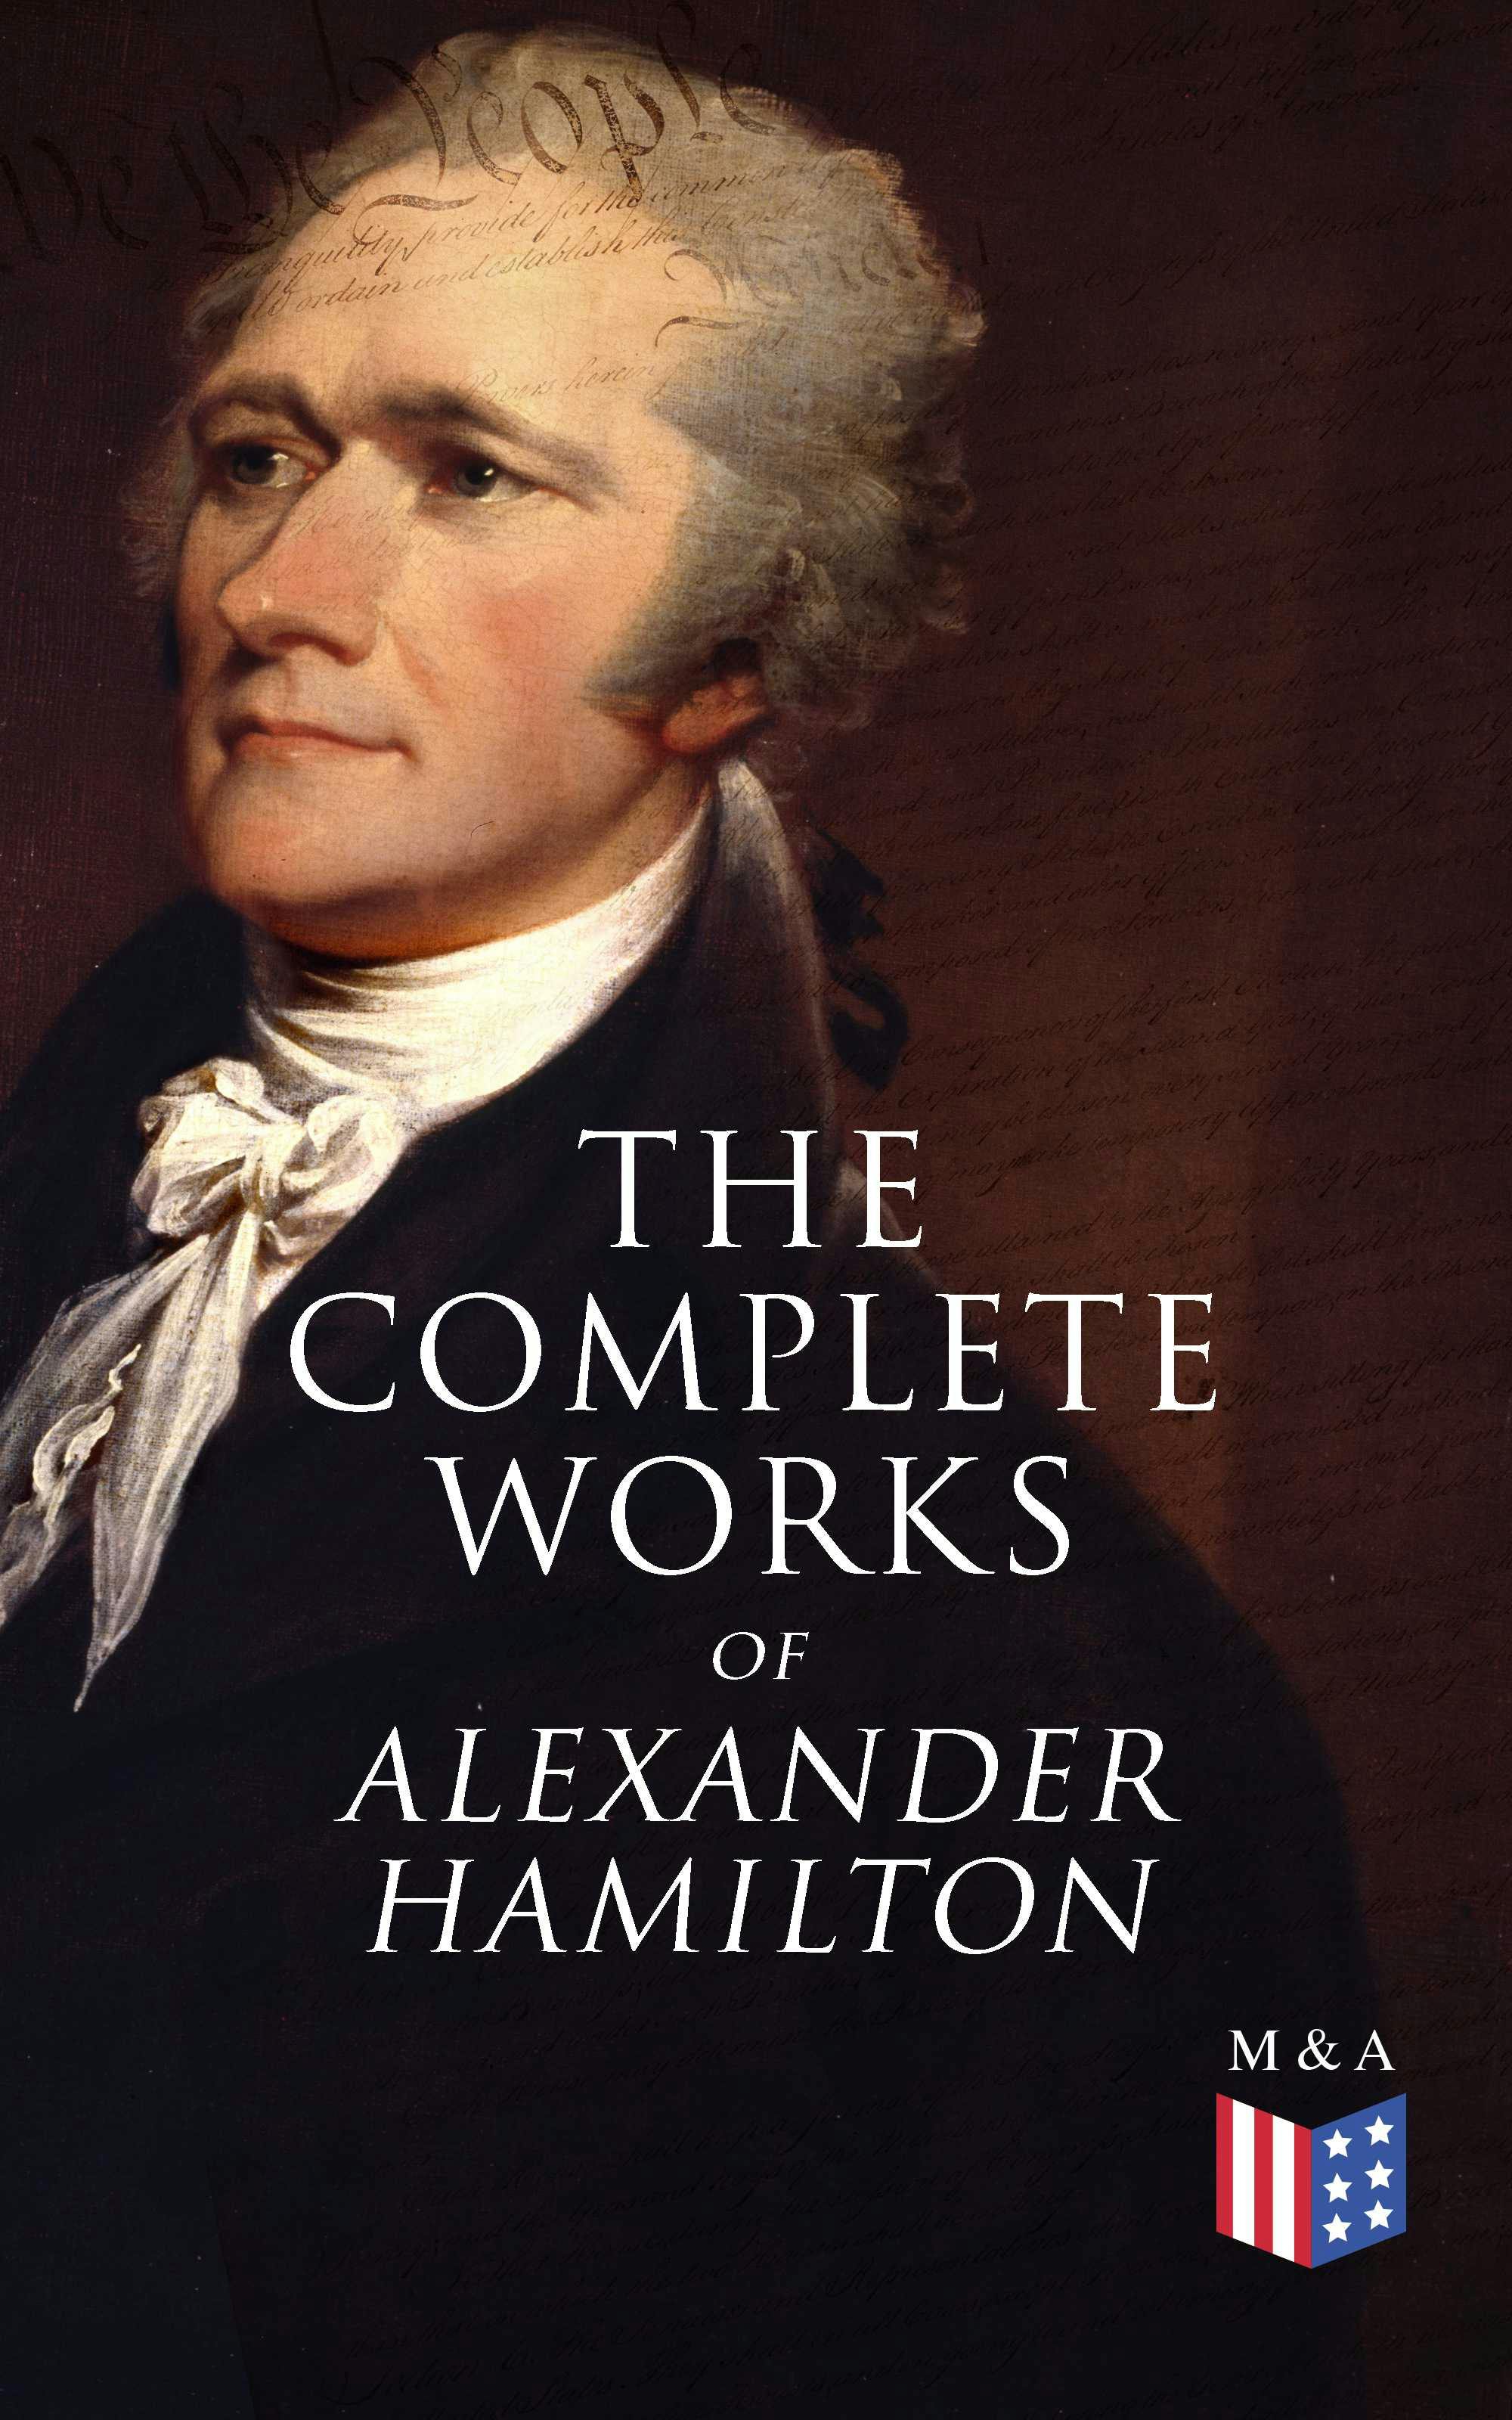 The Complete Works of Alexander Hamilton: Biography, The Federalist Papers, The Continentalist, A Full Vindication, Publius, Letters Of H.G, Military Papers, Private Correspondence, The Pacificus - Allan McLane Hamilton, Alexander Hamilton